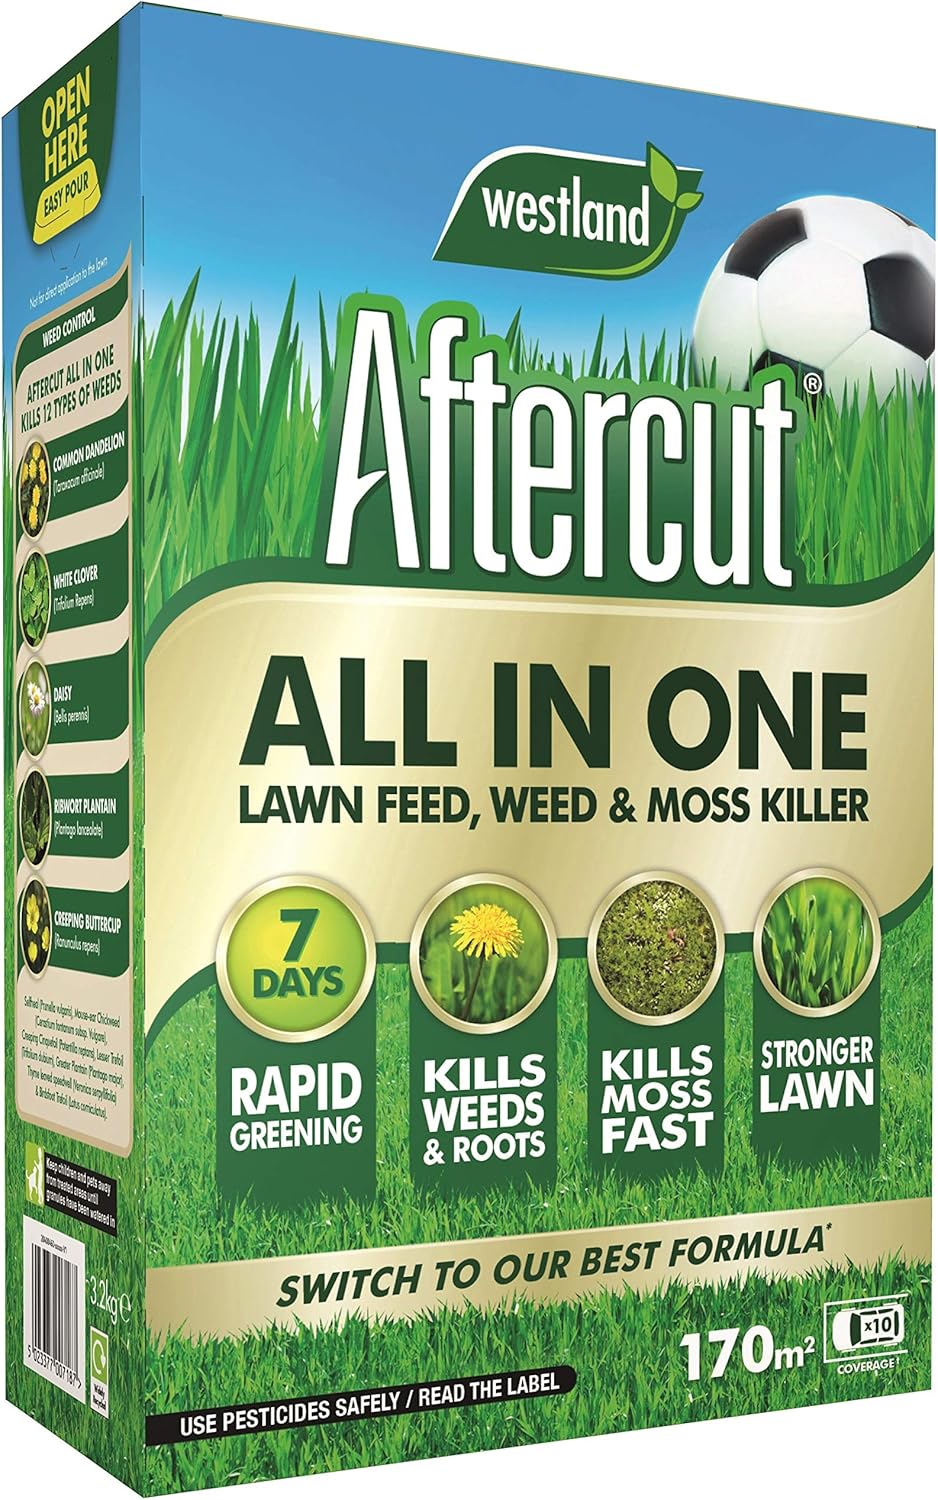 Aftercut 20400473 All In One Lawn Feed, Weed and Moss Killer, 170 m2, 5.25 kg?20400473